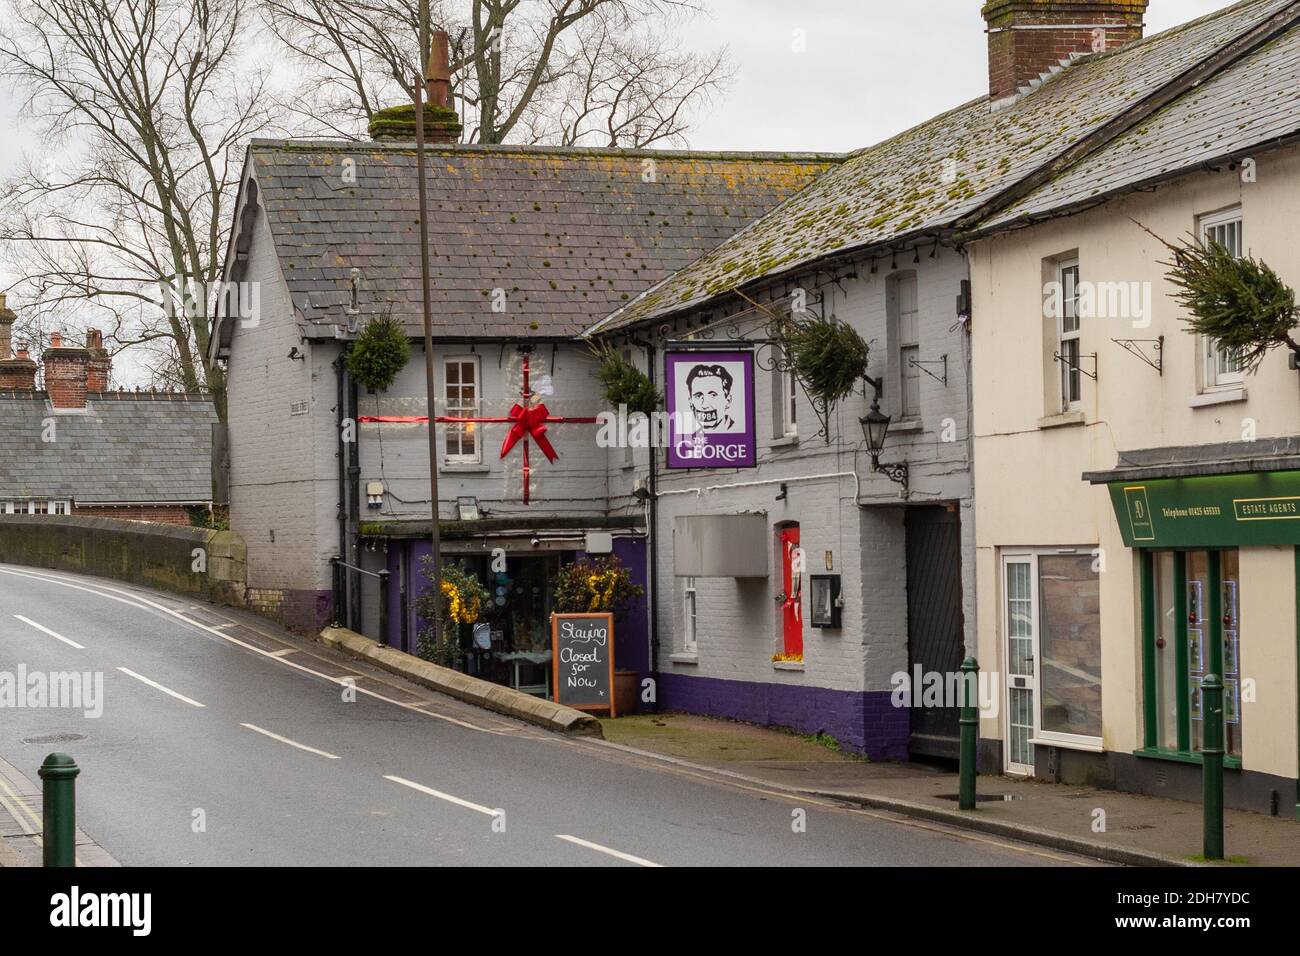 Fordingbridge, New Forest, Hampshire, UK, 10th December 2020. The George riverside pub remains closed after Lockdown 2 with the area now in Tier 2 of coronavirus restrictions. The New Forest district was in Tier 1 before the second lockdown. A new pub sign hangs outside the entrance. Credit: Paul Biggins/Alamy Live News Stock Photo